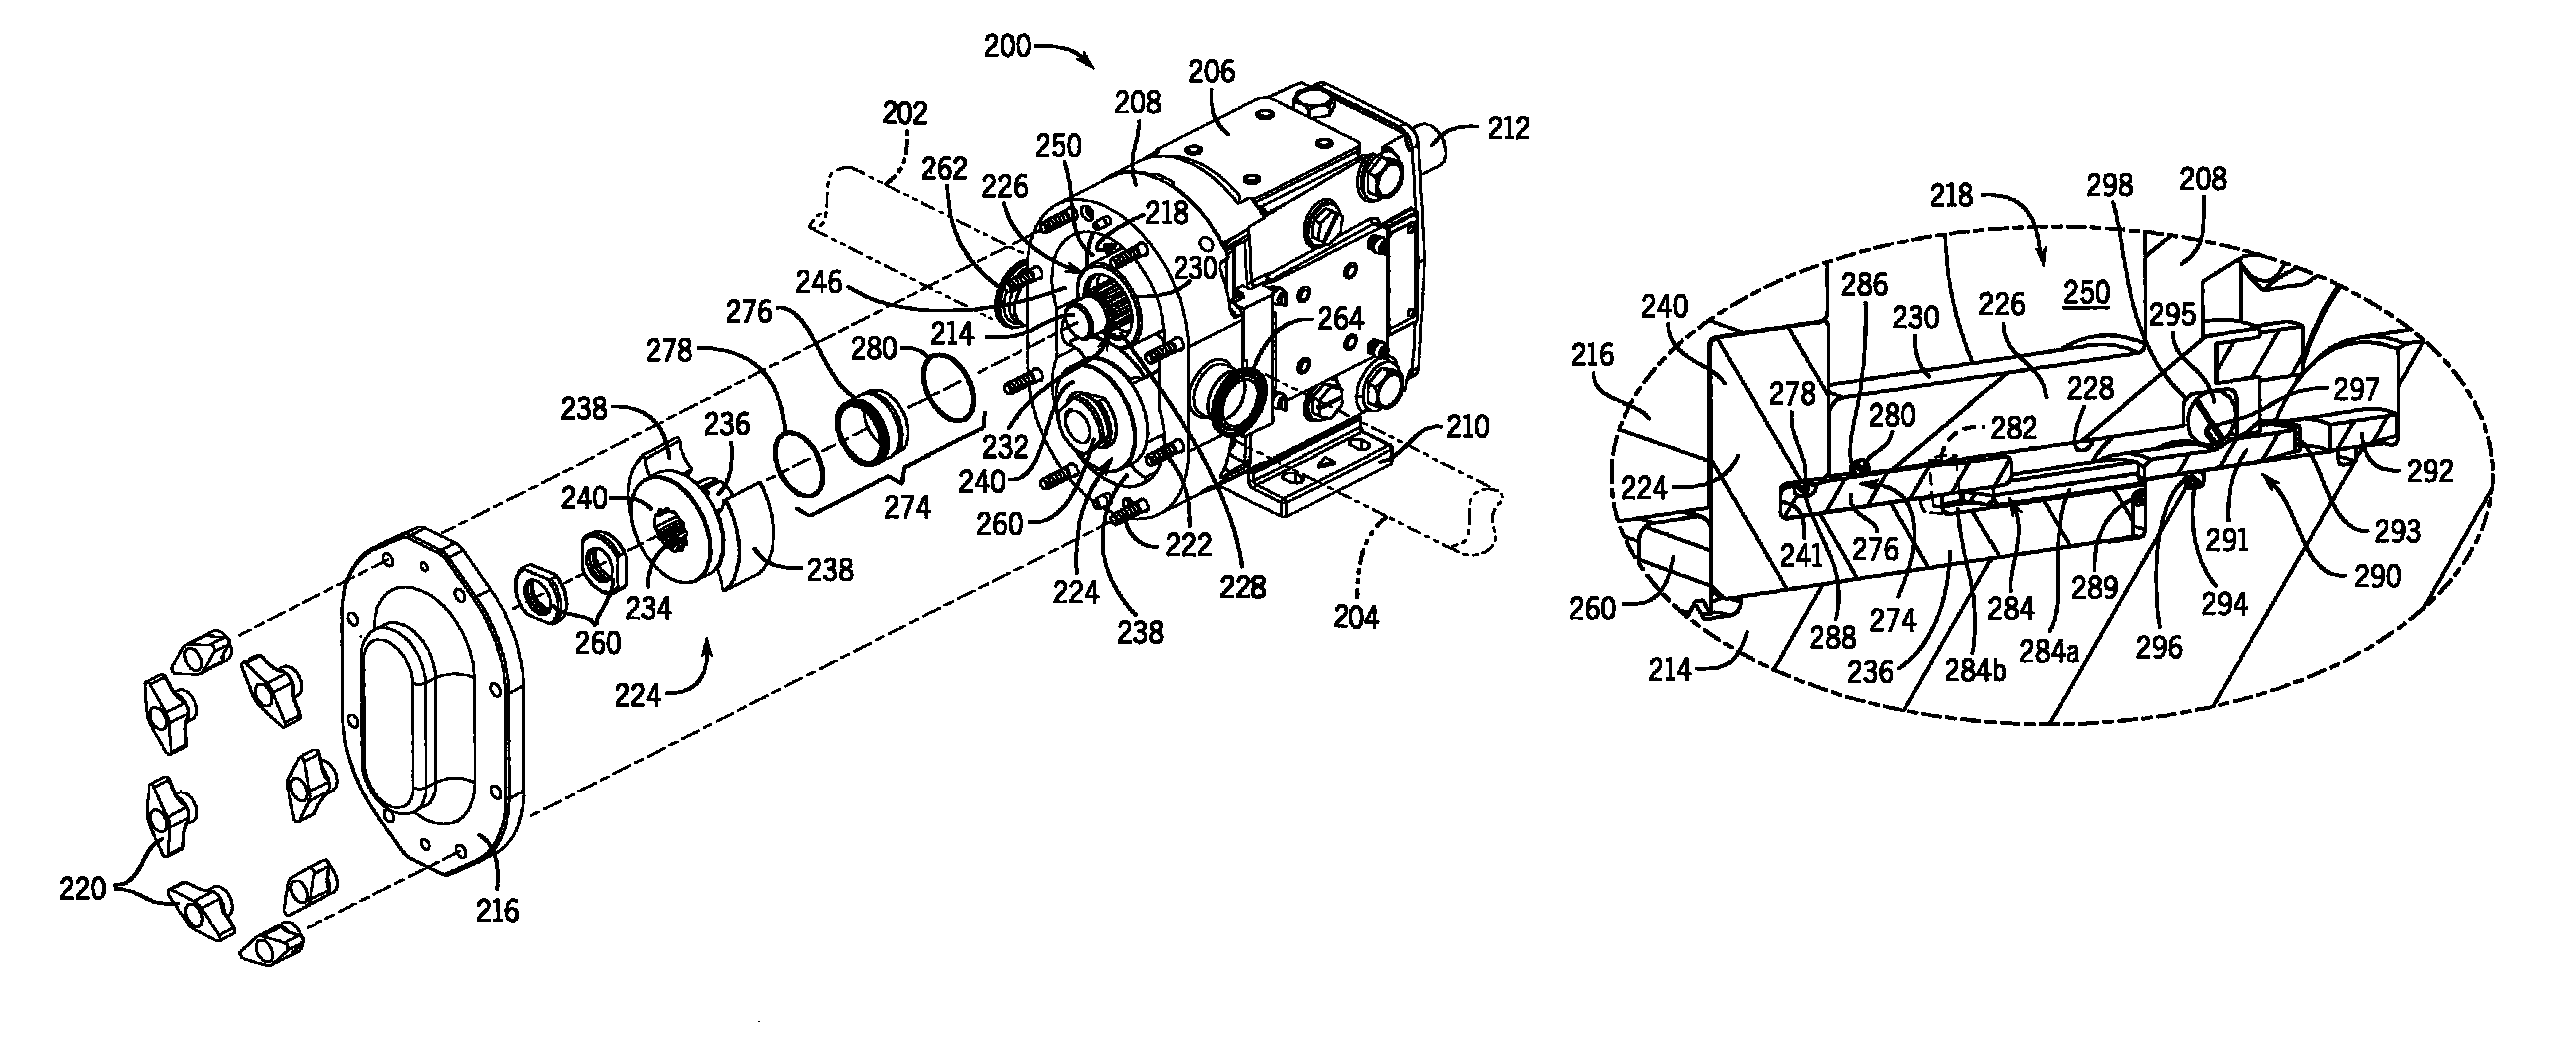 Positive displacement pump with improved sealing arrangement and related method of making